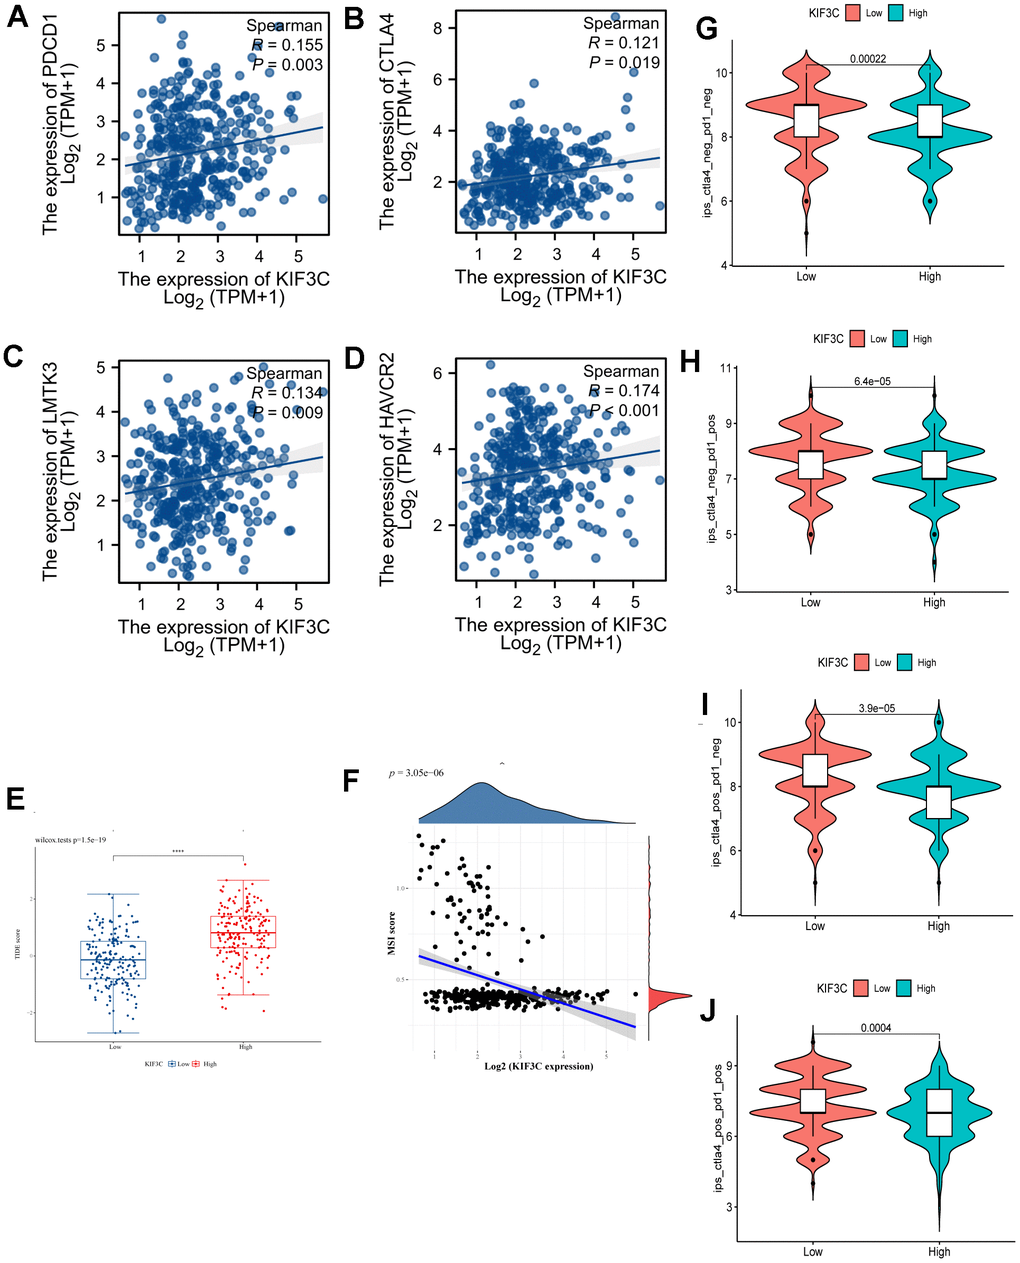 Correlation analysis of KIF3C to the immune checkpoint, TIDE score, MSI, and IPS. (A) PD-1, (B) CTLA4, (C) LMTK3, (D) HAVCR2. (E) TIDE score between KIF3C high- and low-expression expression groups. (F) MSI Score. (G) The IPS, (H) IPS-PD-1/PD-L1/PD-L2, (I) IPS-CTLA4, and (J) IPS-PD-1/PD-L1/PD-L2 + CTLA4.